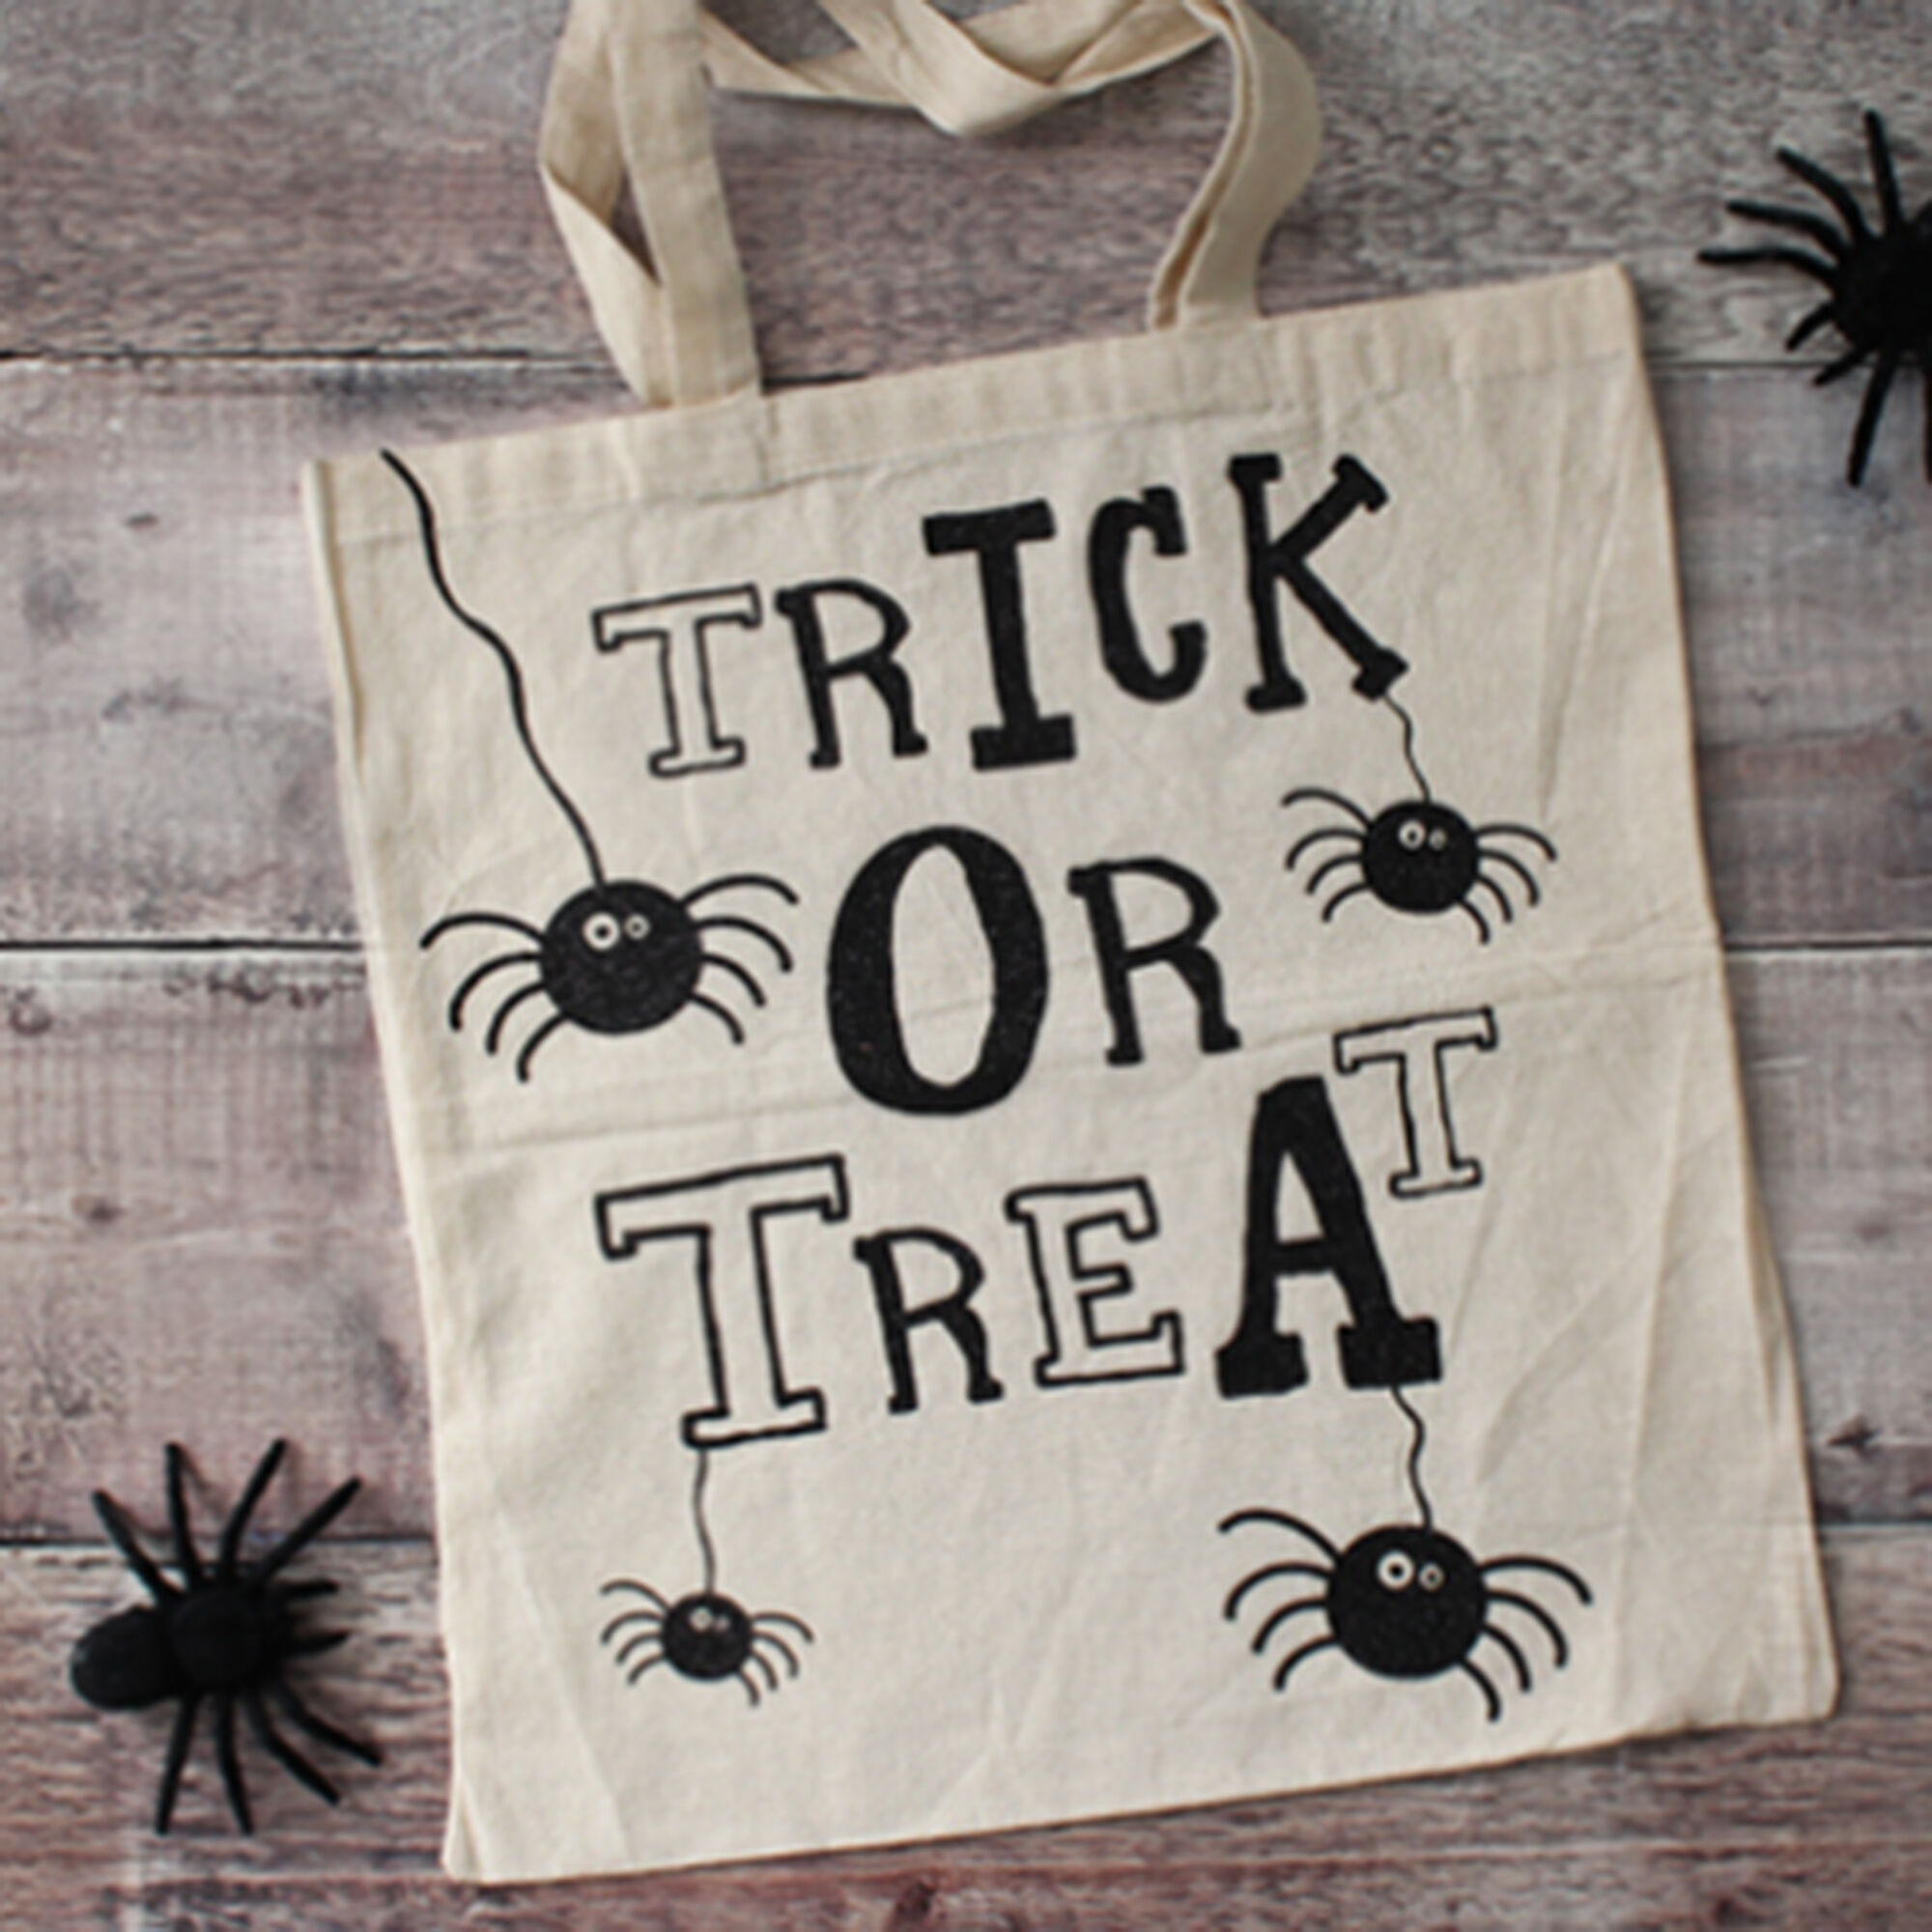 Cricut: How to Make a Personalised Halloween Bag | Hobbycraft